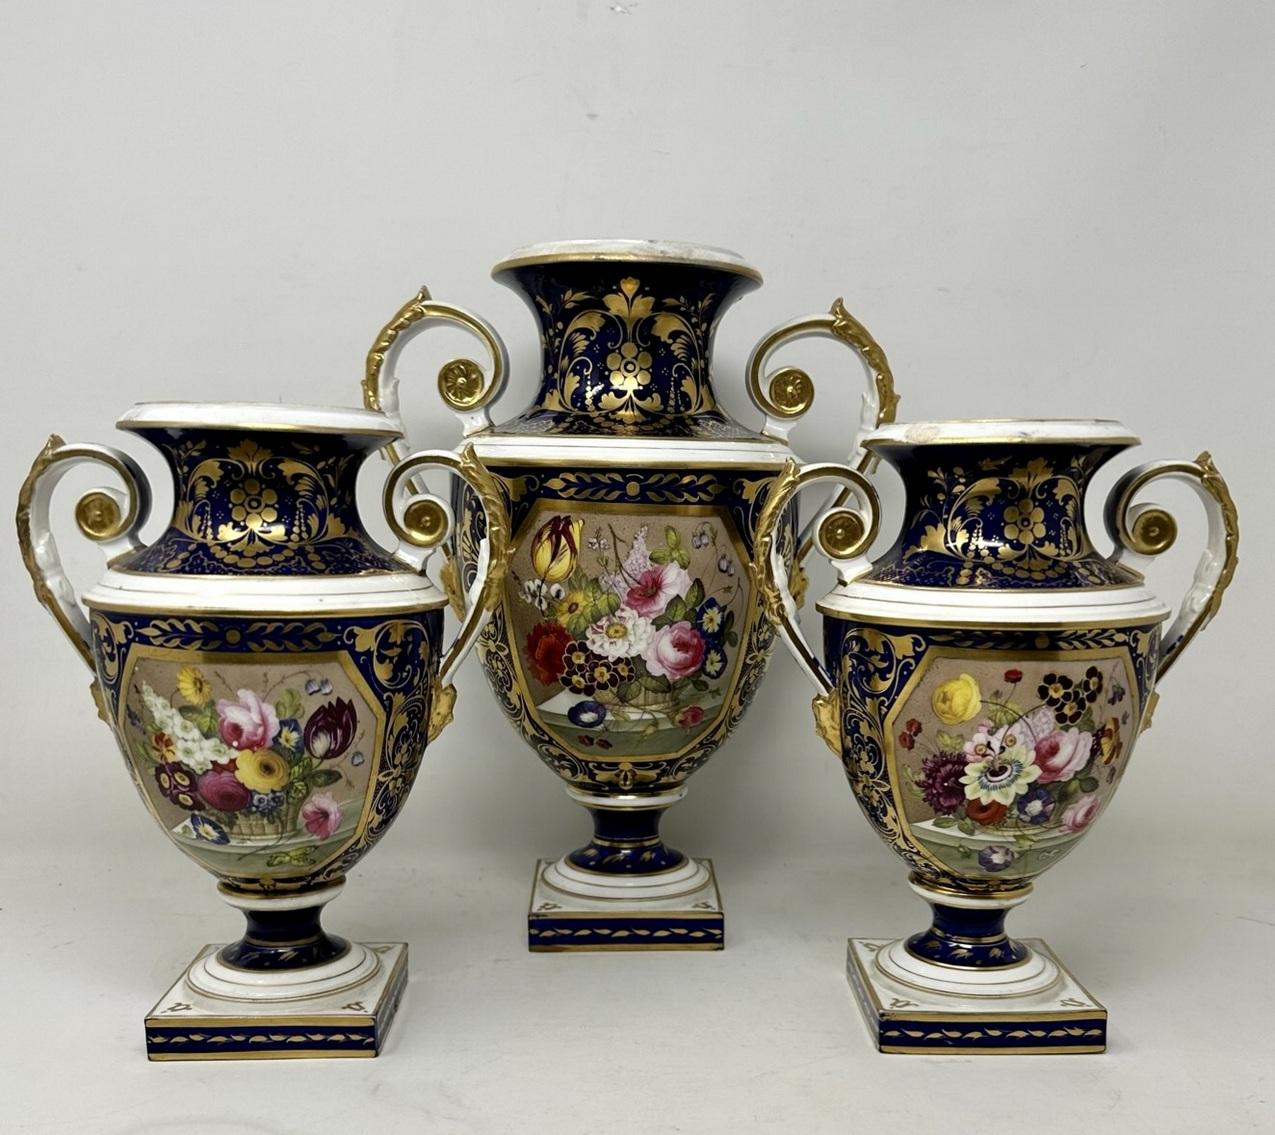 An exceptionally fine quality rare example of an early Bloor period Royal Crown Derby hand painted porcelain Garniture of generous proportions by Thomas Steel. First quarter of the Nineteenth Century, Regency period. 
Each vase finely painted on the